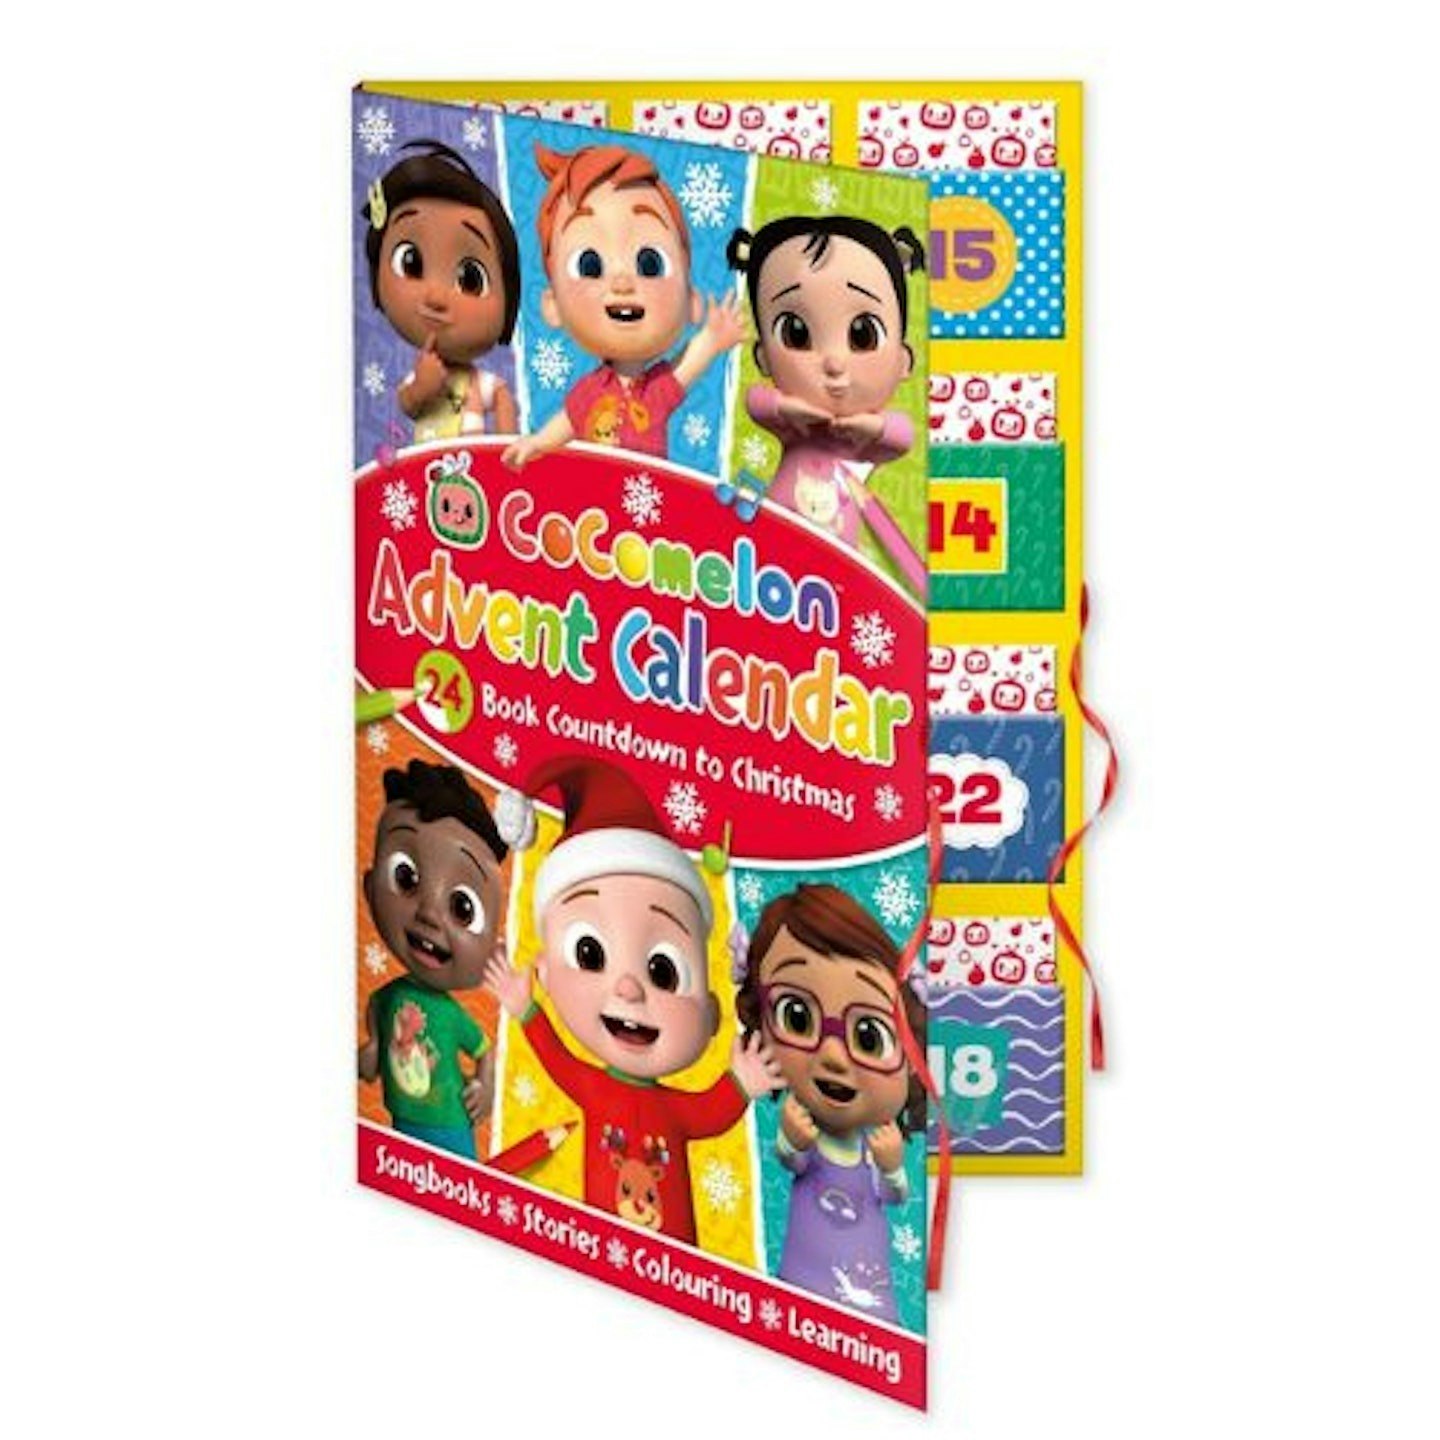 CoComelon Advent Calendar (With Songbooks, Stories, Colouring, and Learning)